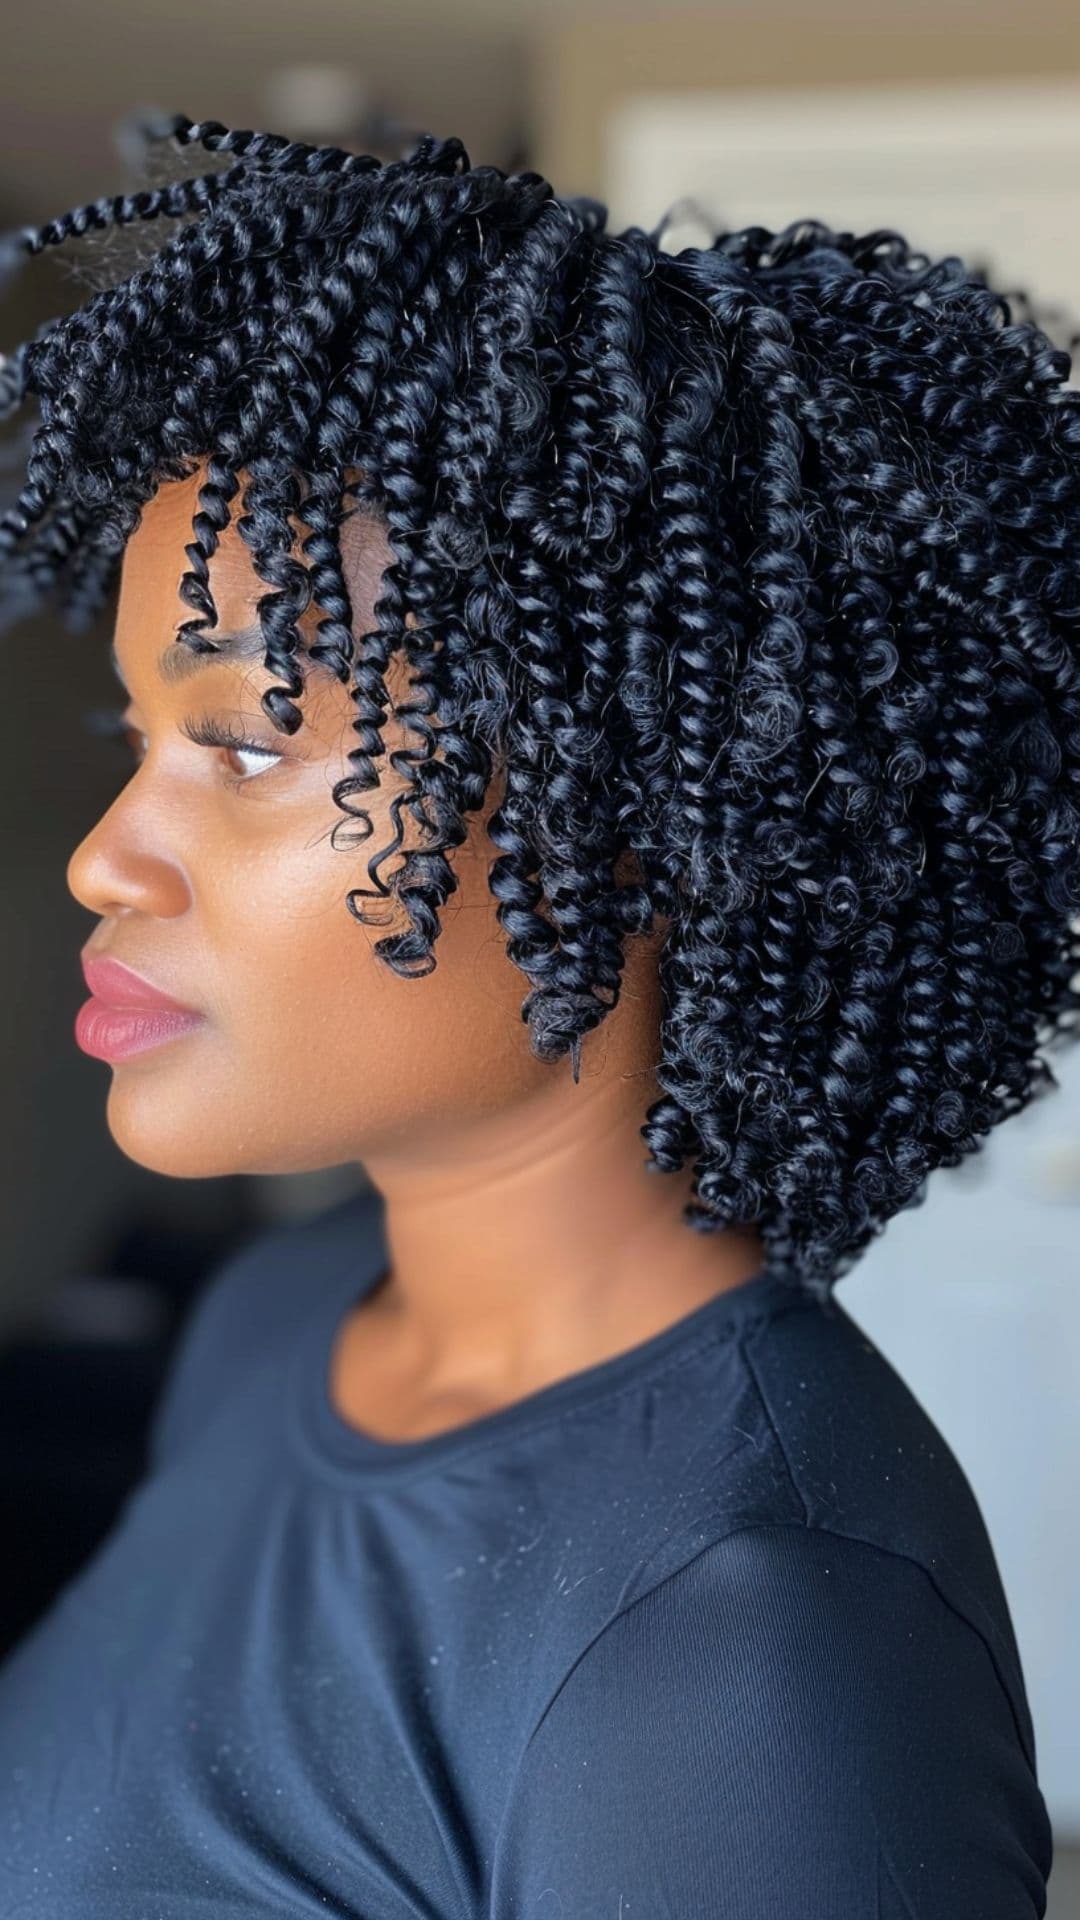 A black woman modelling a jet black curly hair.